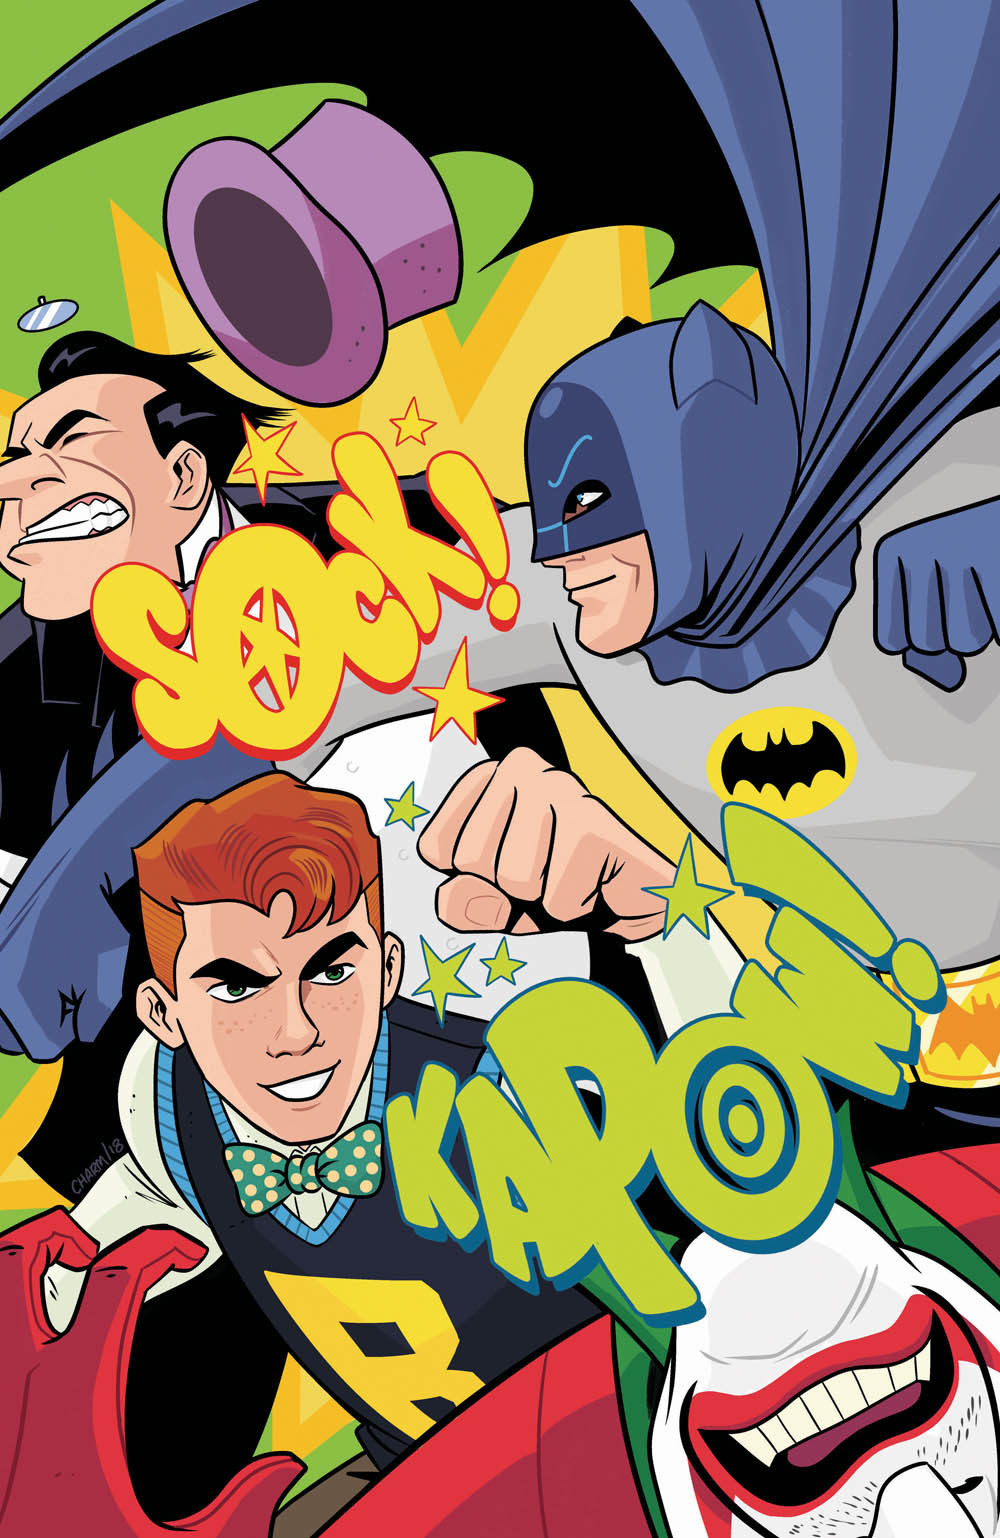 Batman And Archie Andrews Are Teaming Up For A Wholesome, Family-Friendly Adventure